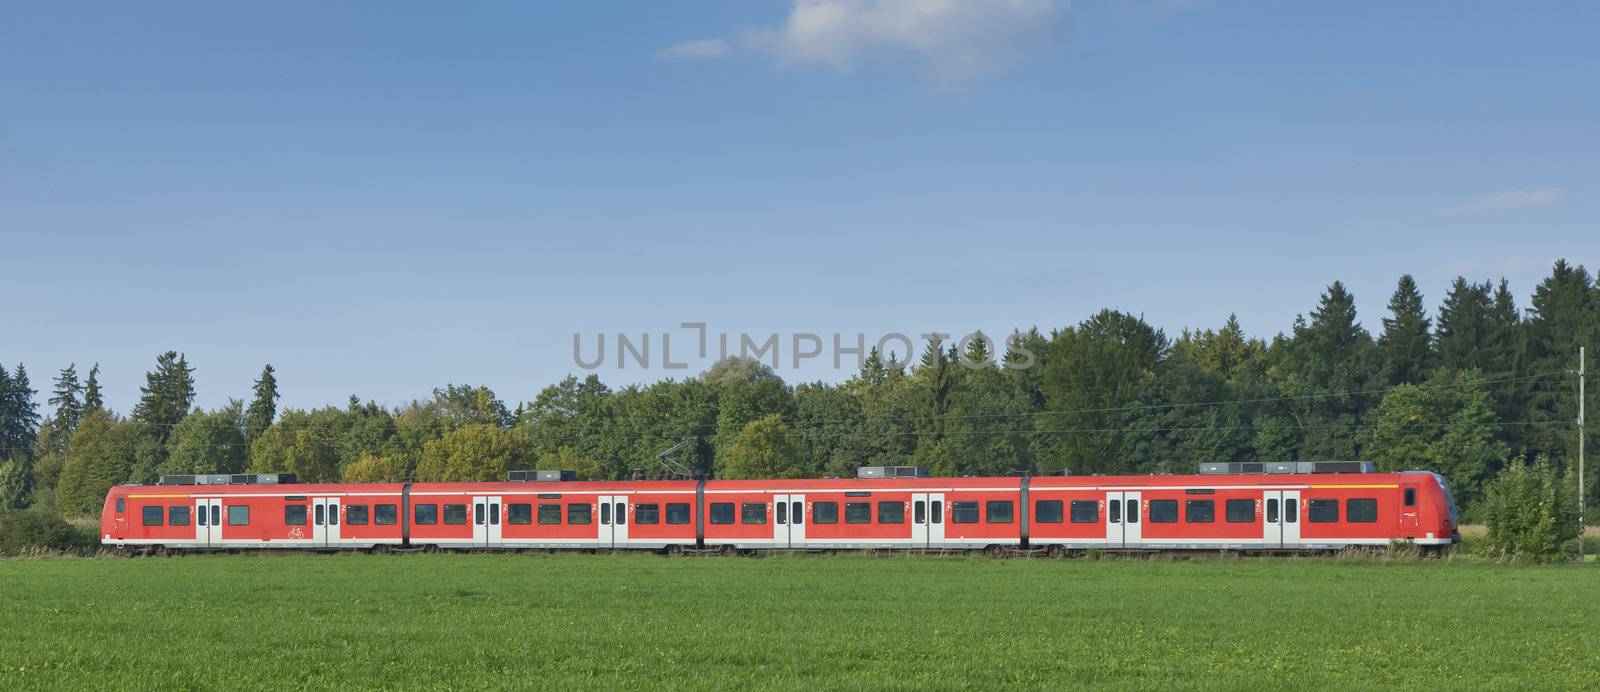 An image of a typical red train in Germany Bavaria